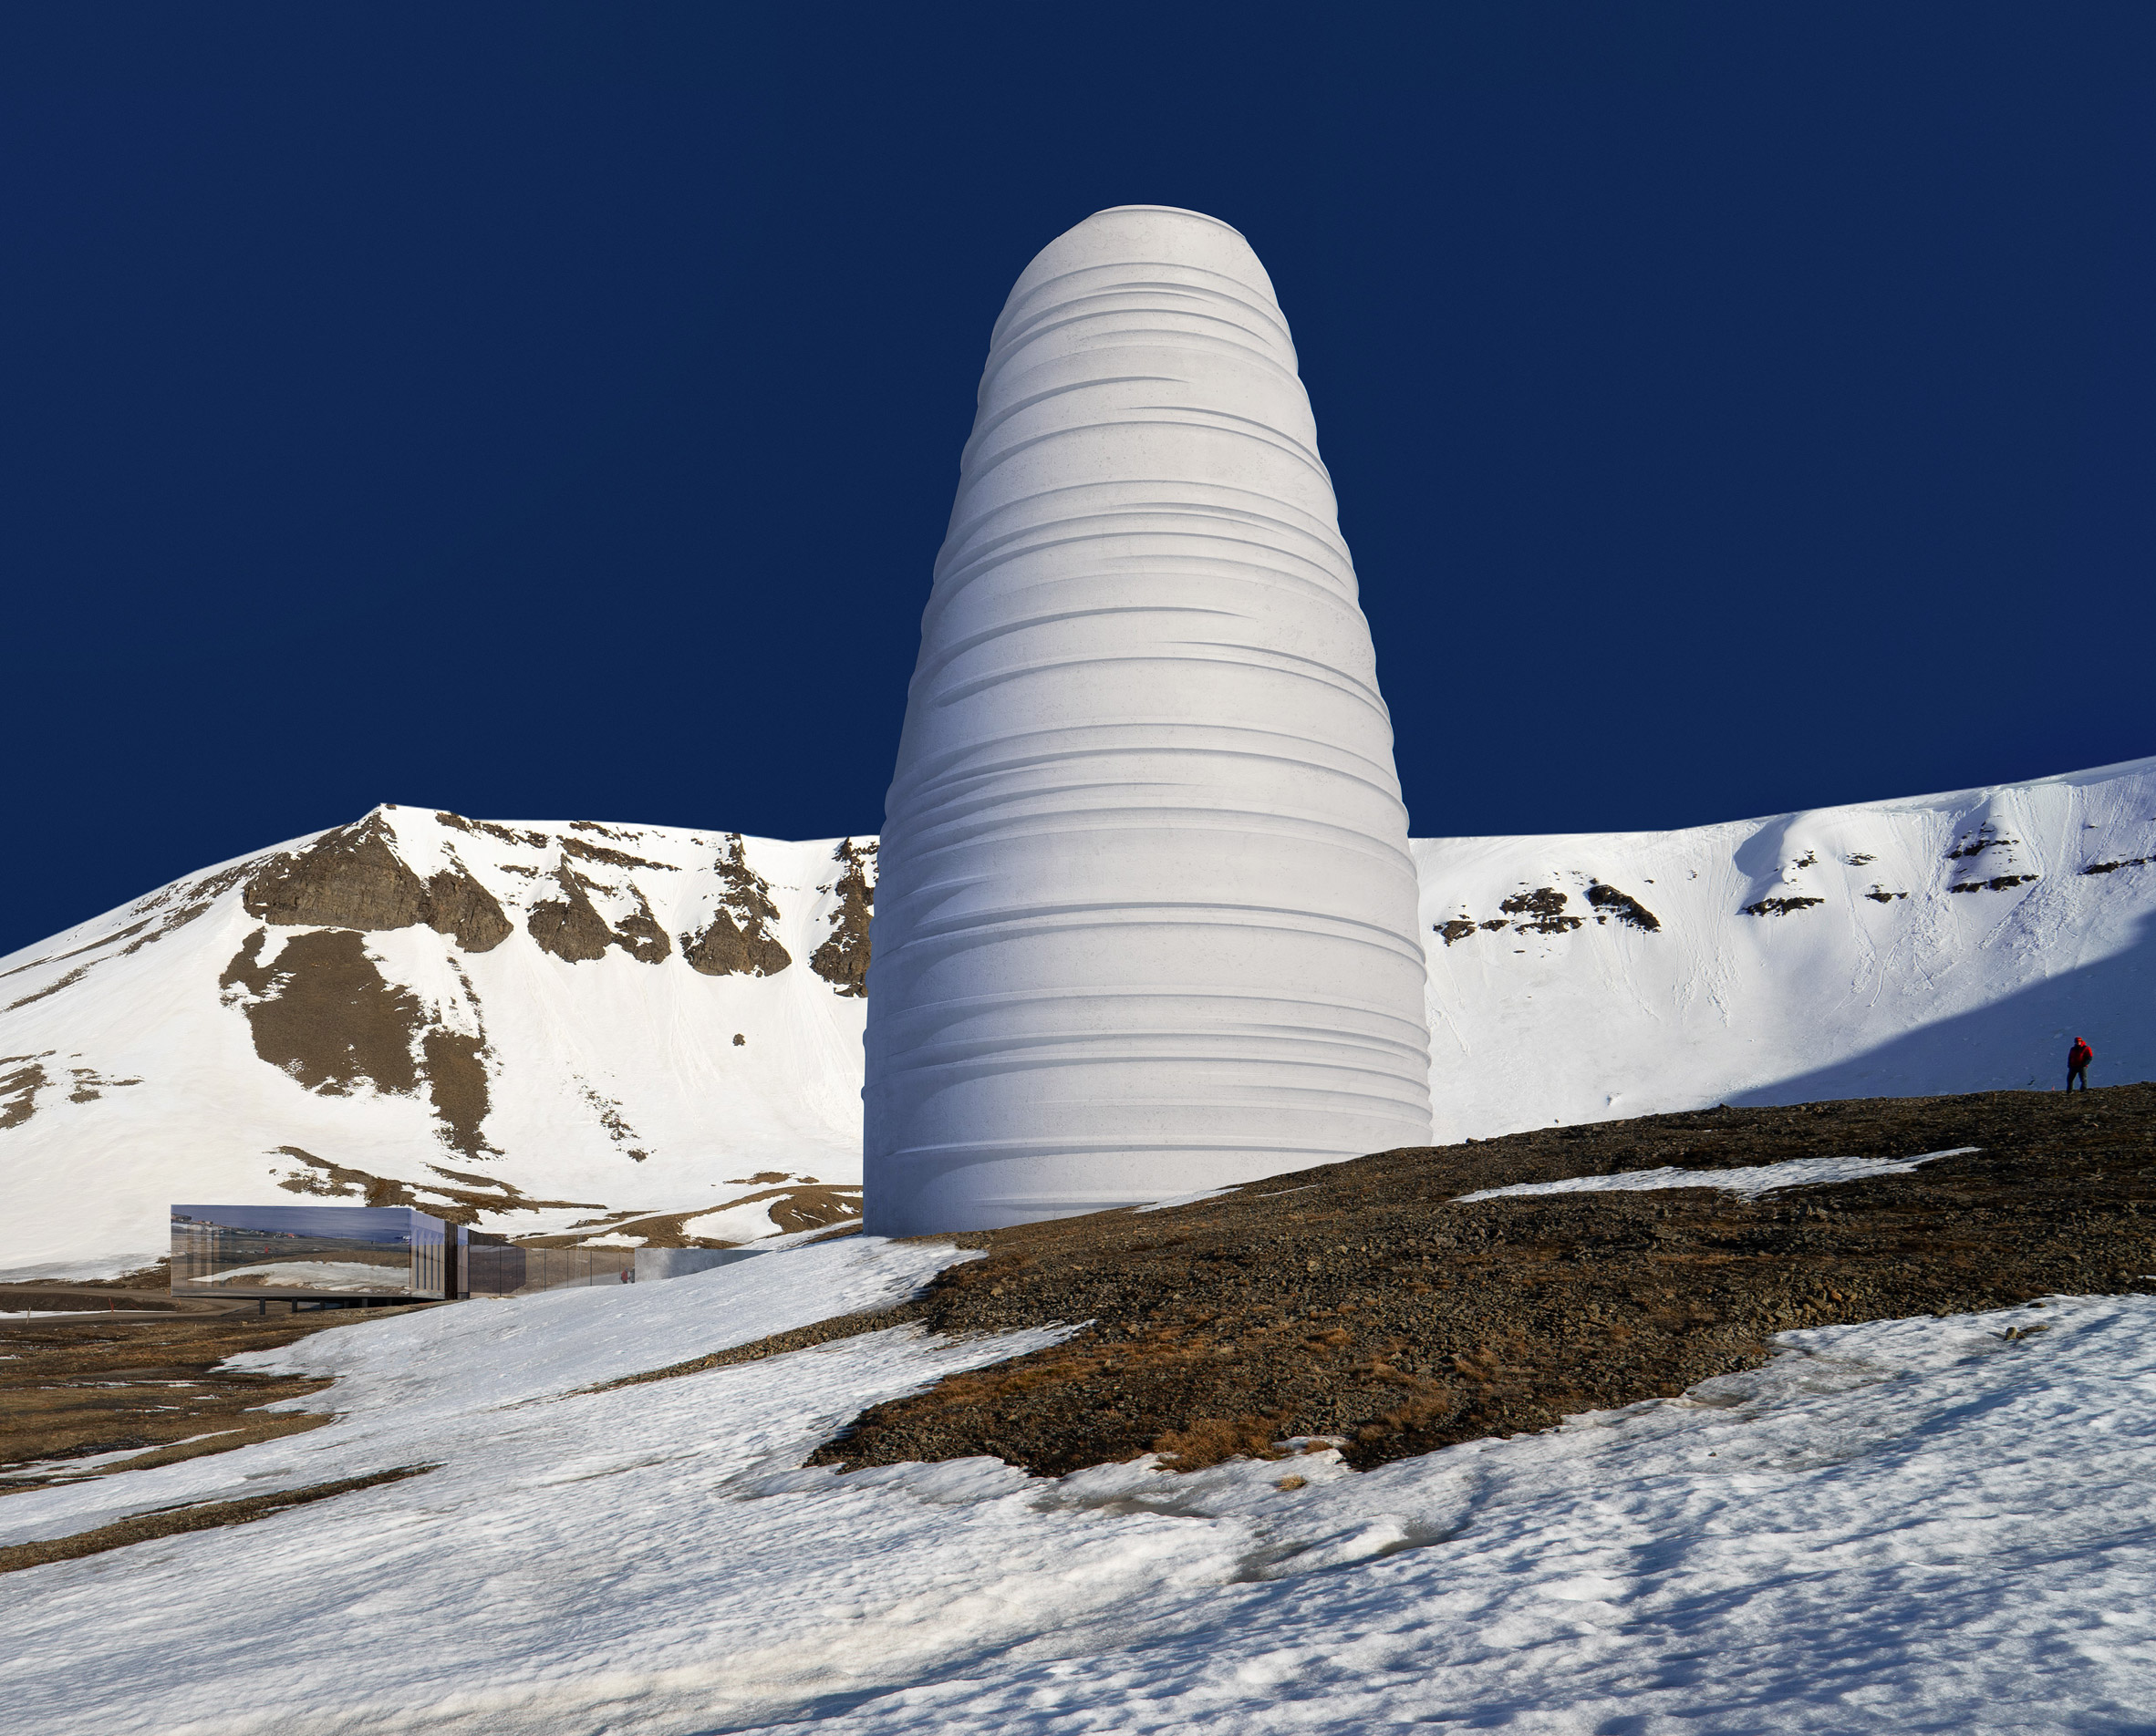 The Arc Visitor Center for Svalbard Global Seed Vault in Svalbard by Snøhetta